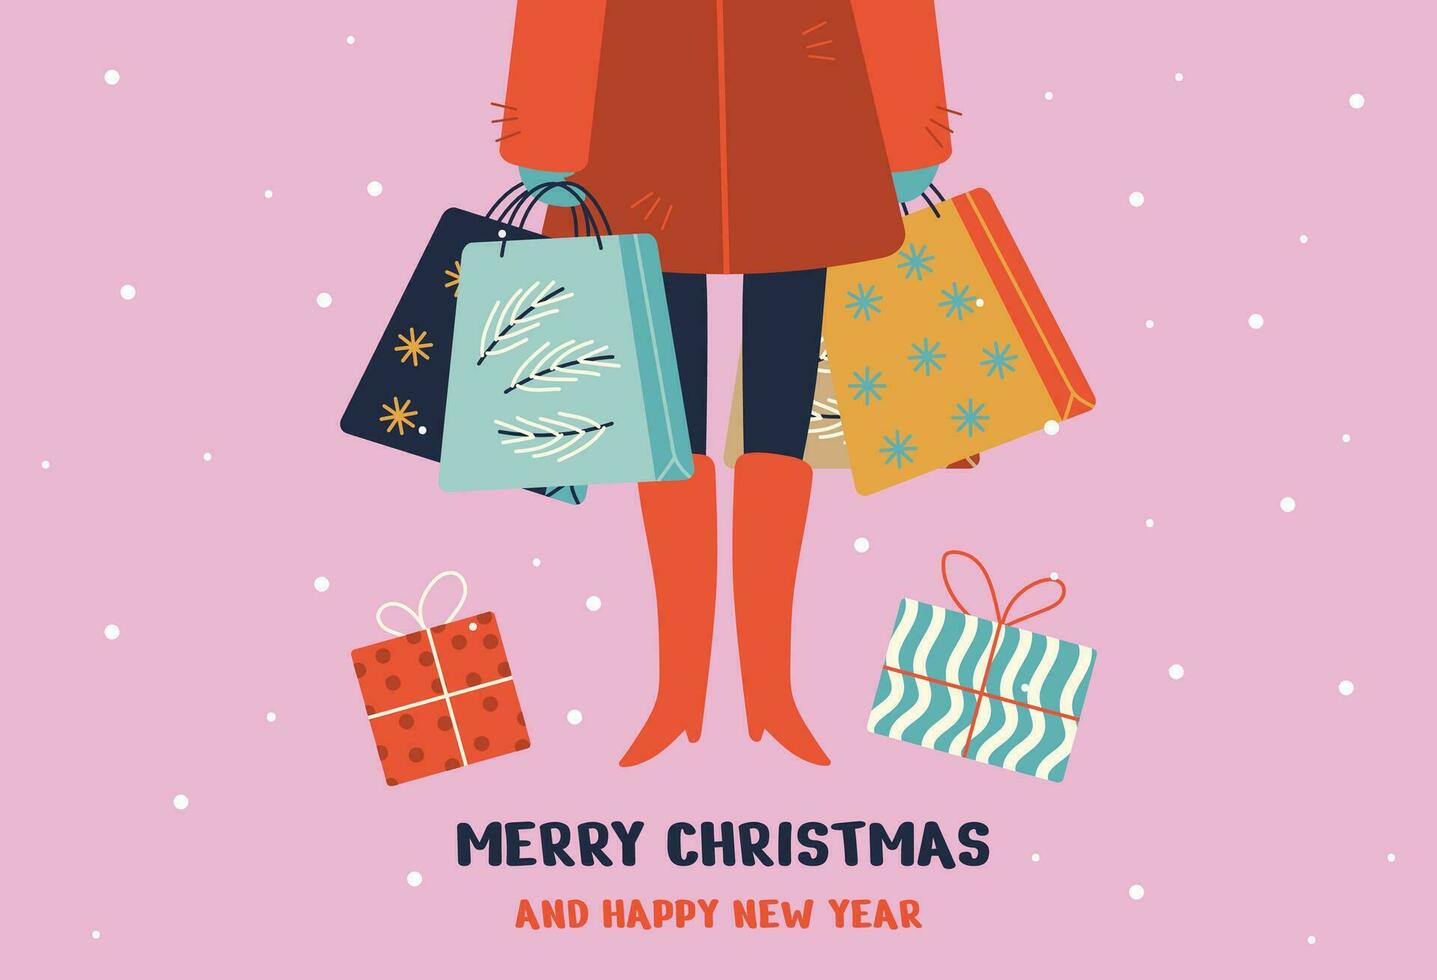 Happy new year and Merry Christmas holiday card, postcard templates with people, gifts and snow. Merry christmas, happy holidays, holly jolly text. vector